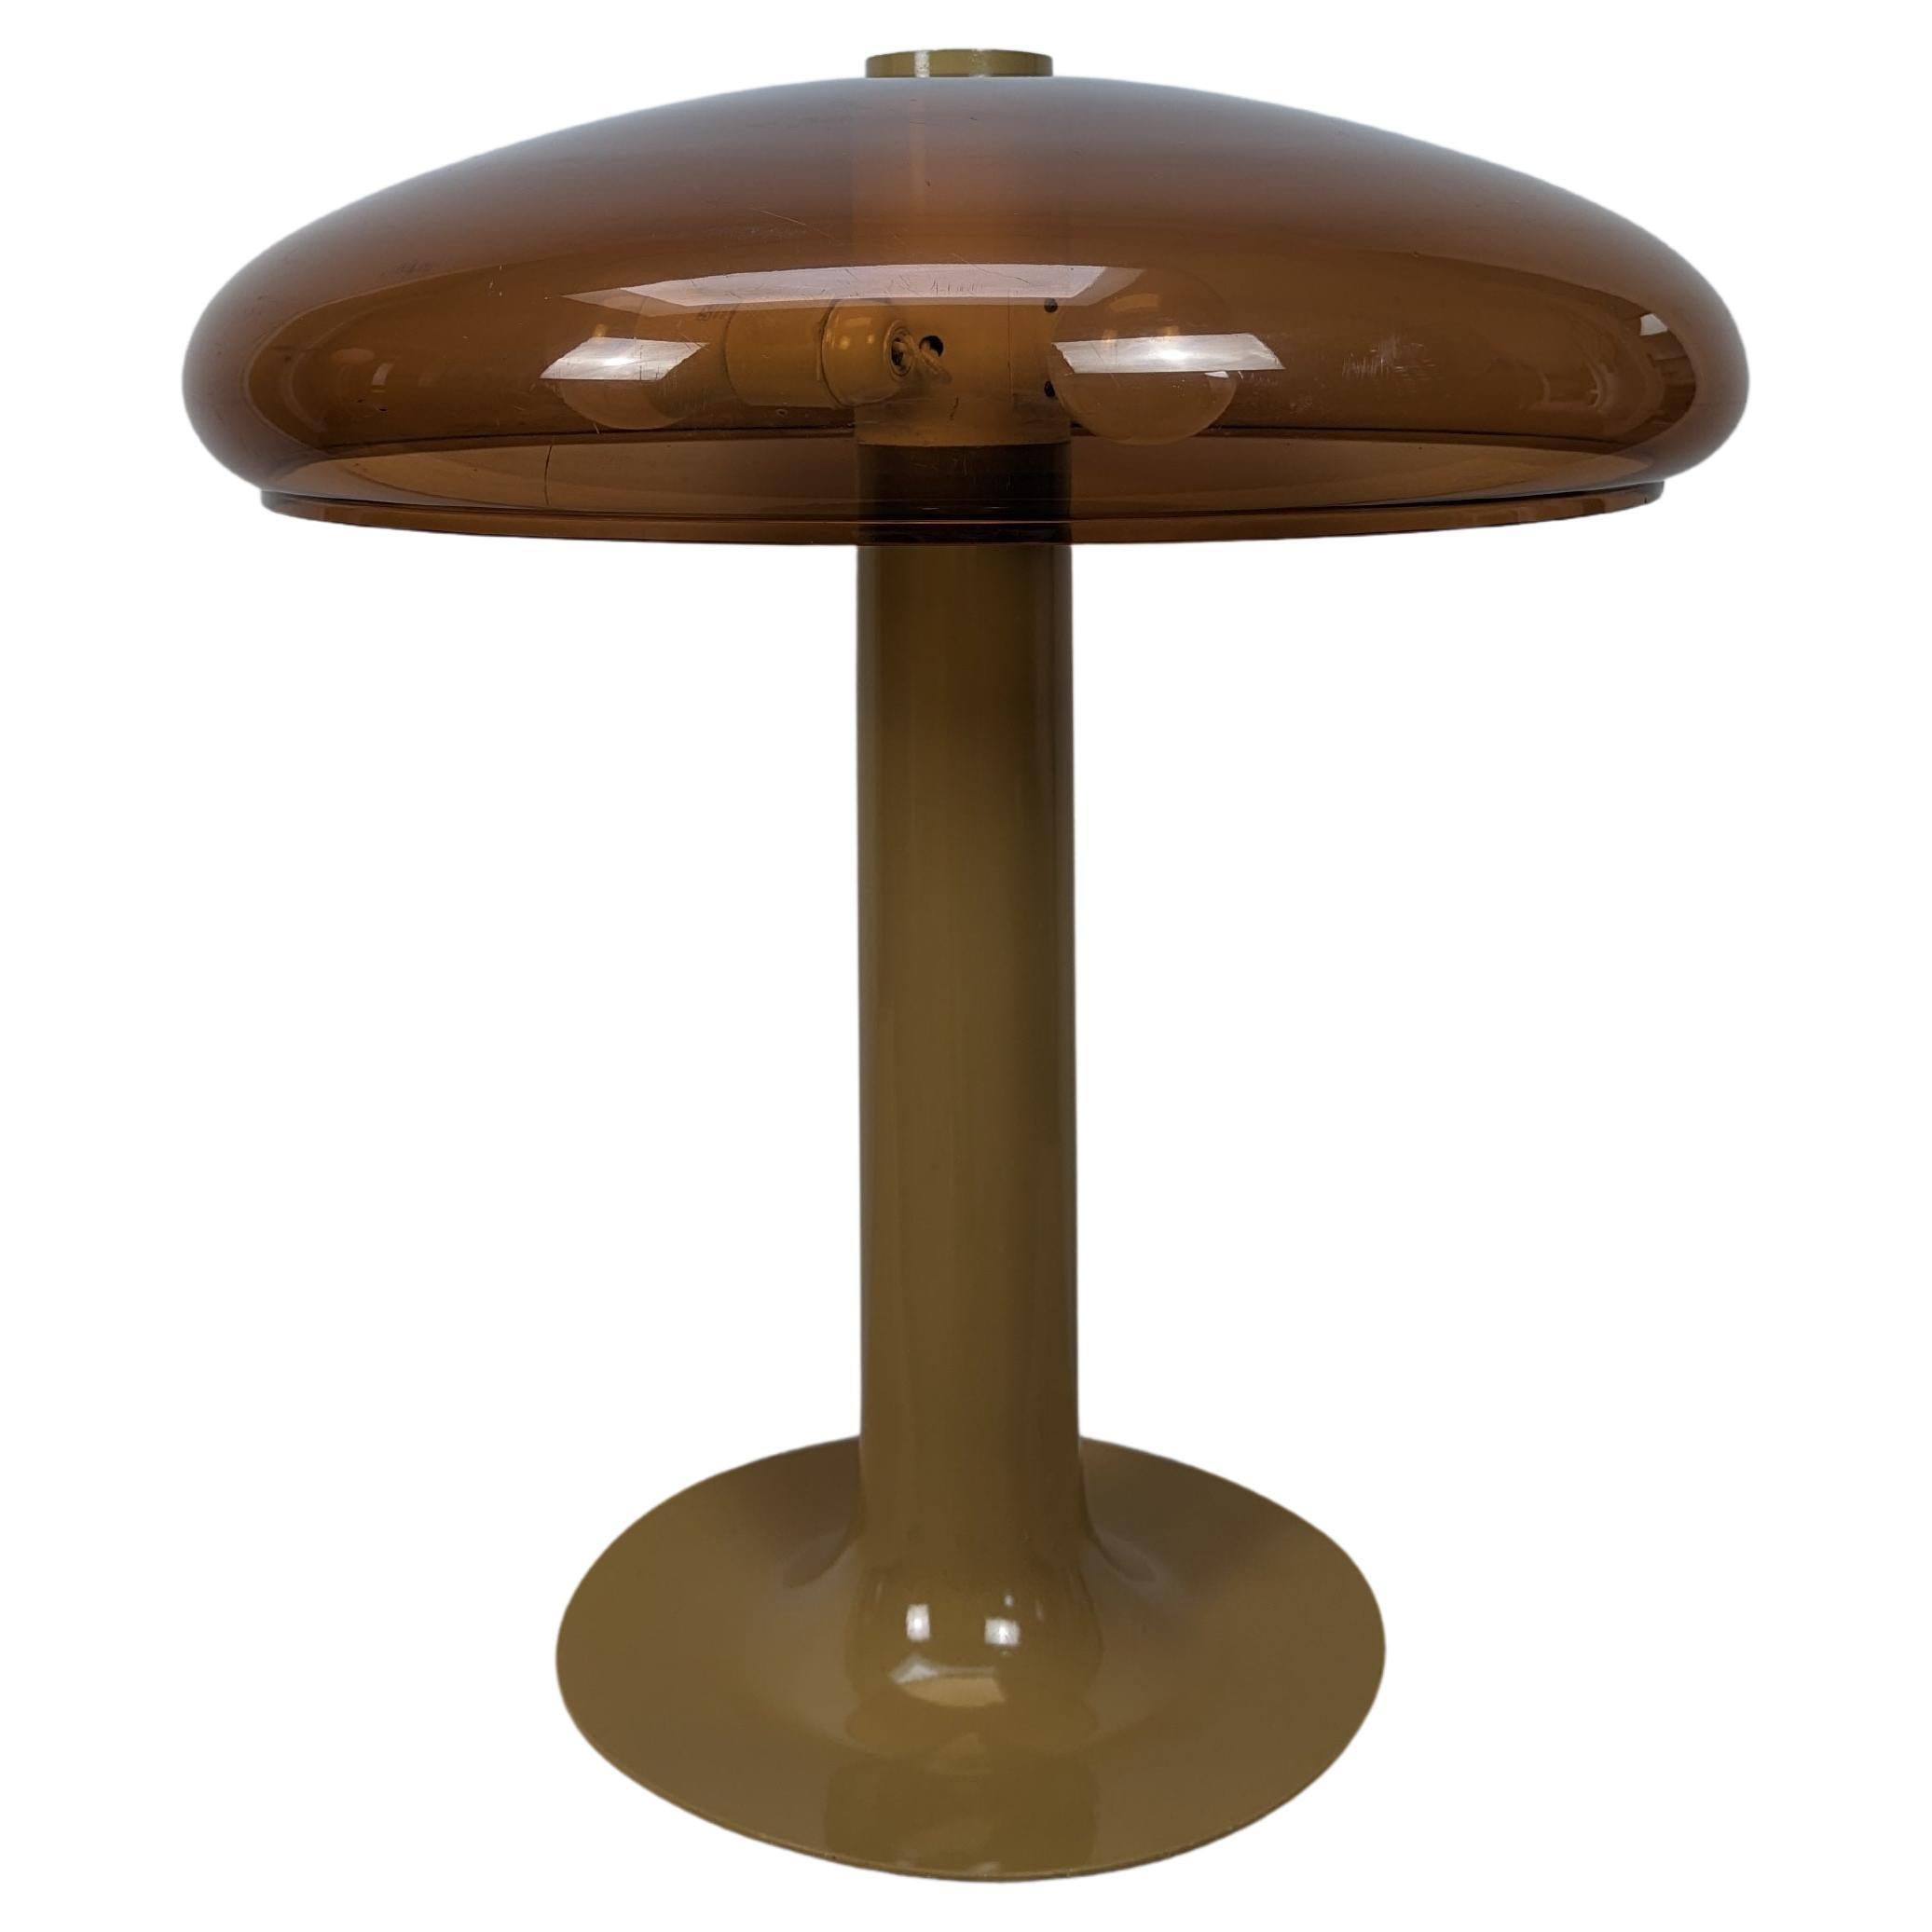 Spectacular space age mid-century table lamp